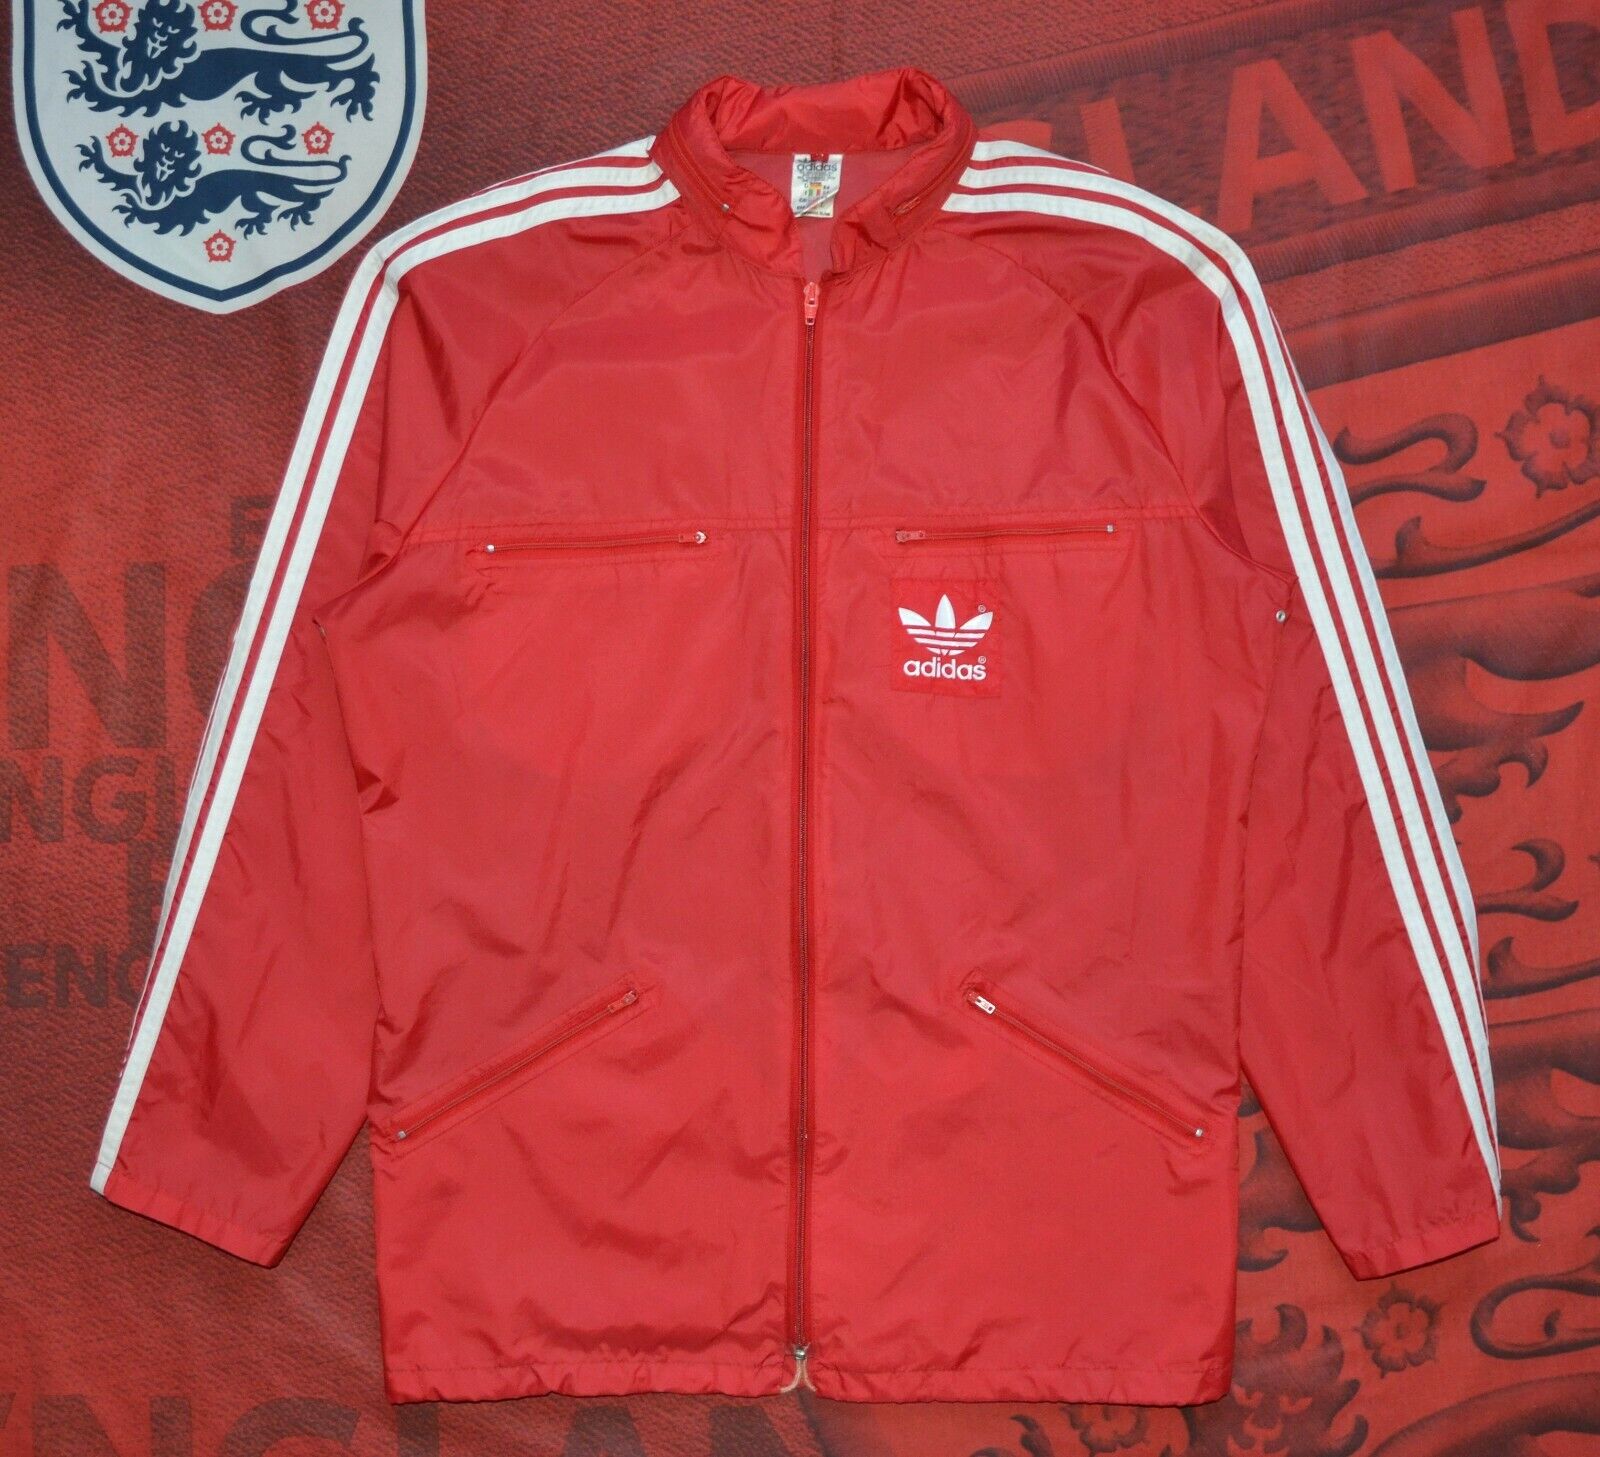 Vintage Adidas Jacket Size L Red Made In Thailand Very Rare | eBay